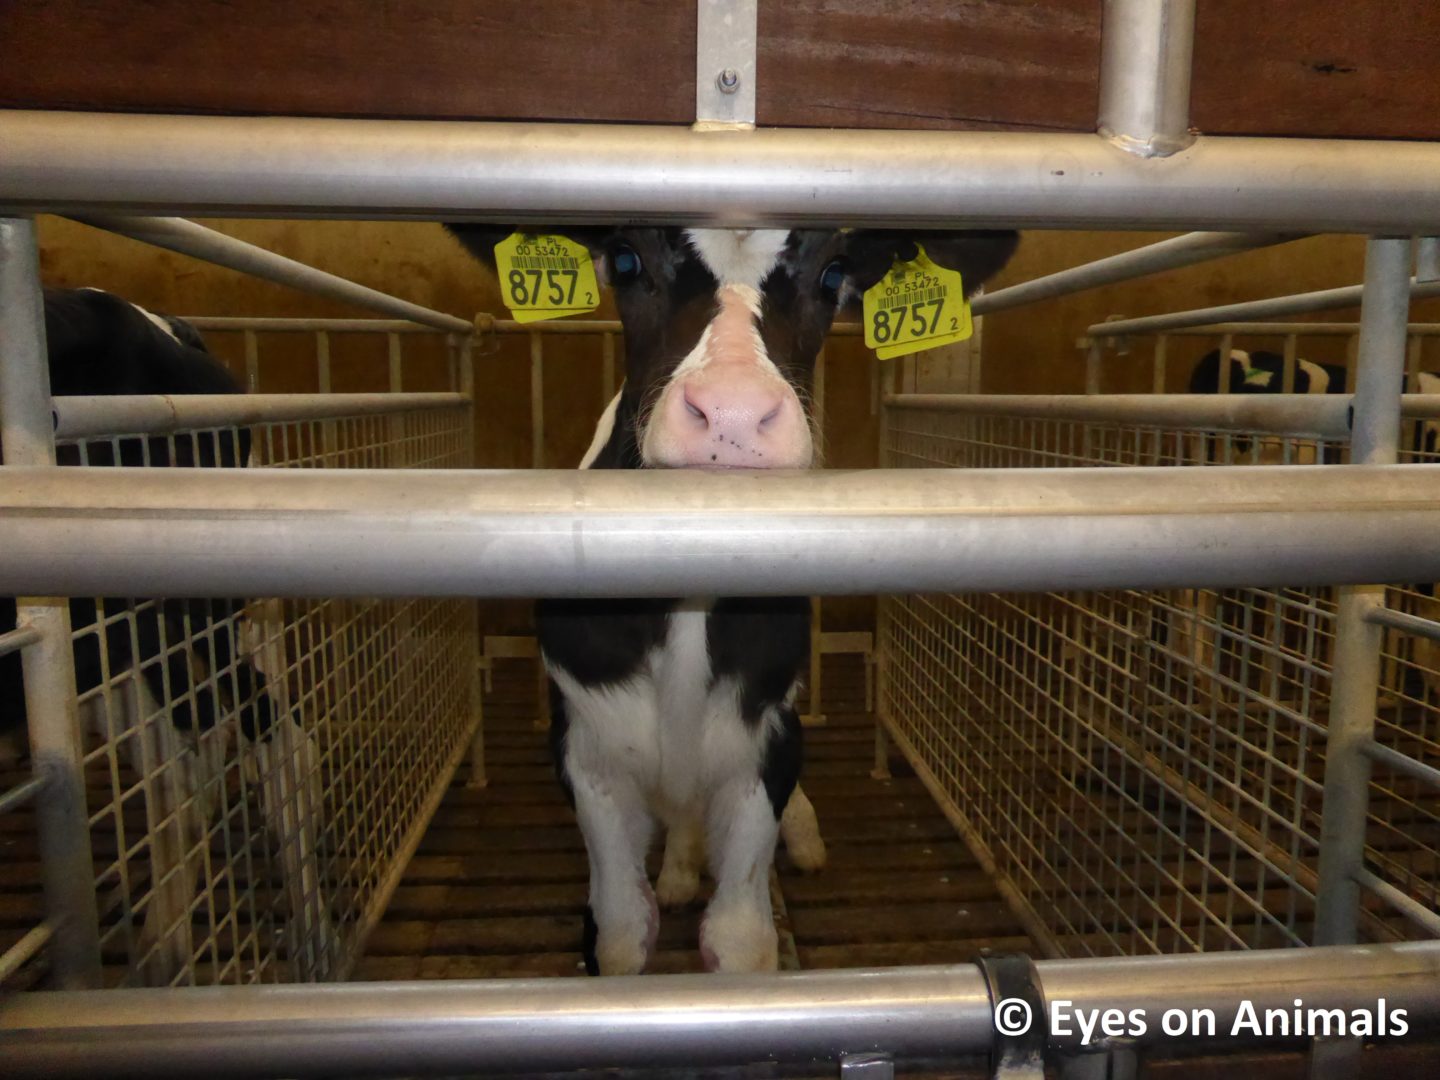 Revealed: the suffering faced by Scotland's farm animals during live transport 4